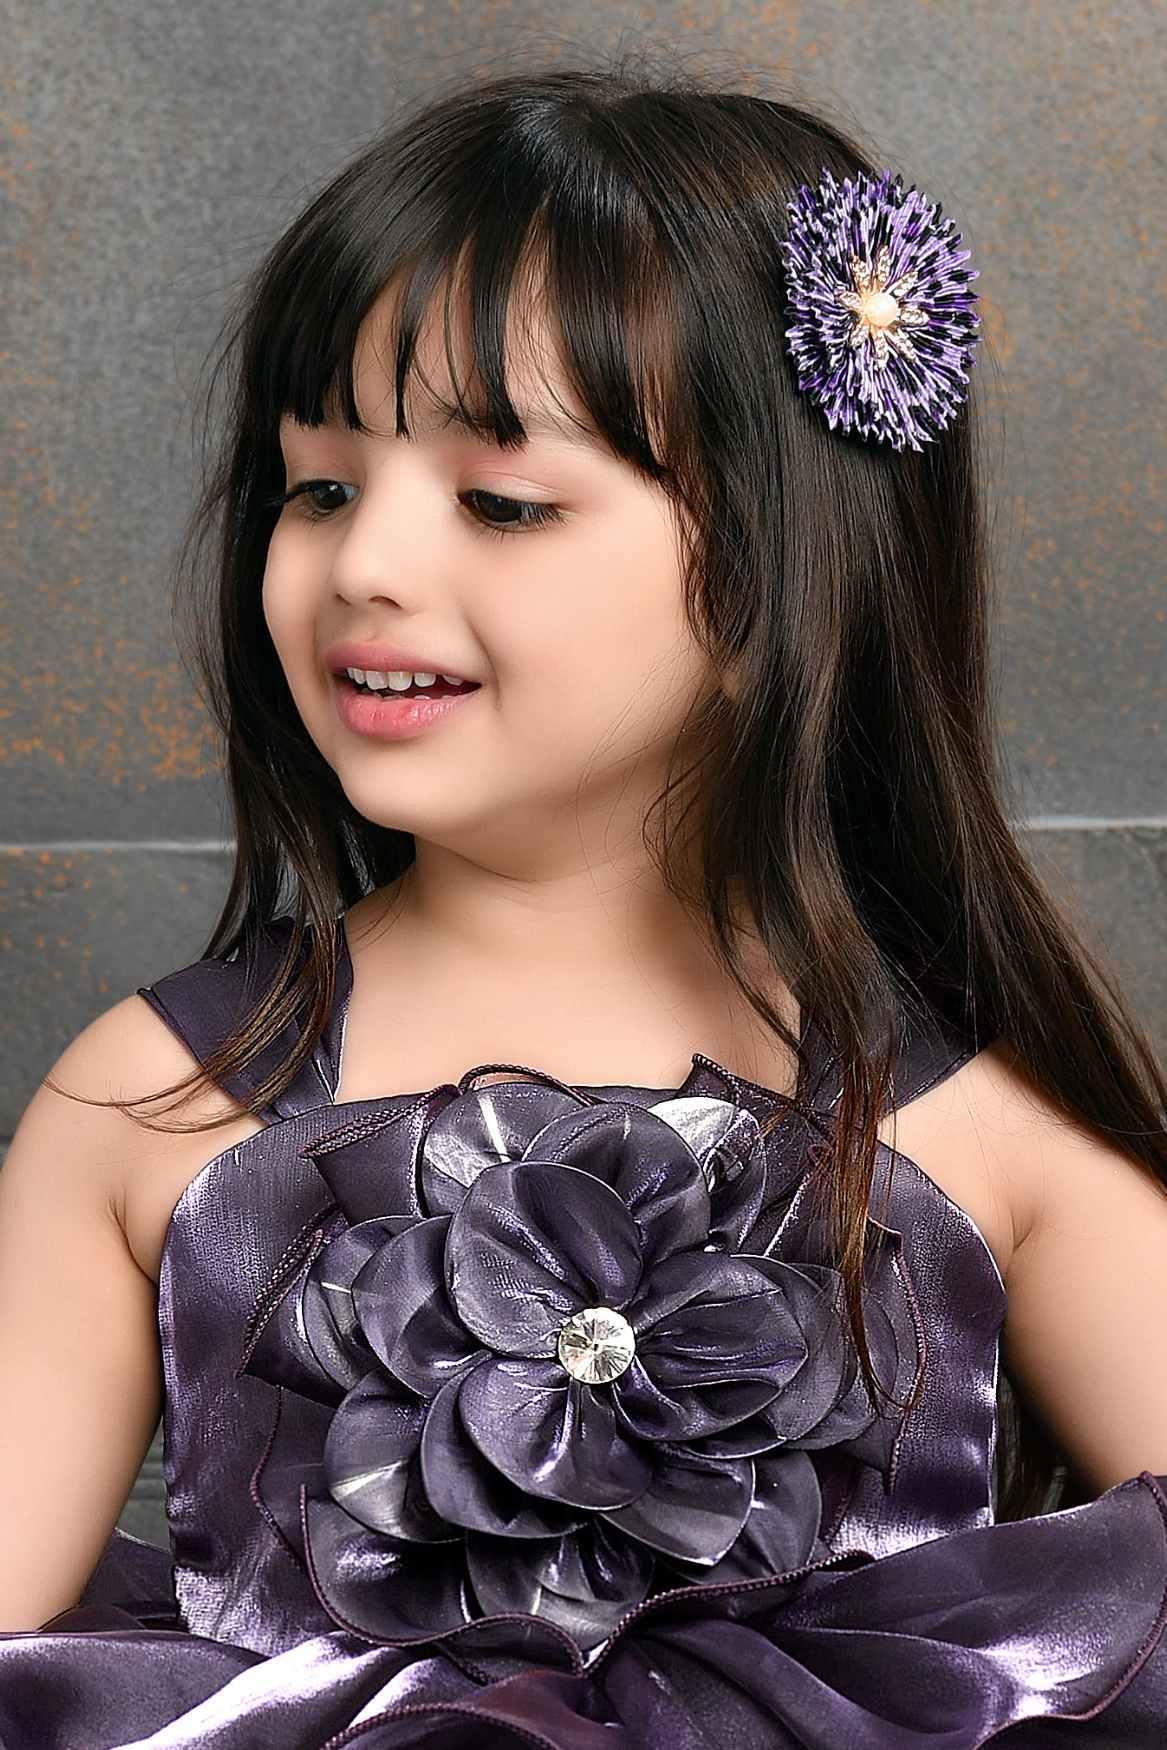 Purple Satin Partywear Frock With Flower Embellishment For Girls - Lagorii Kids